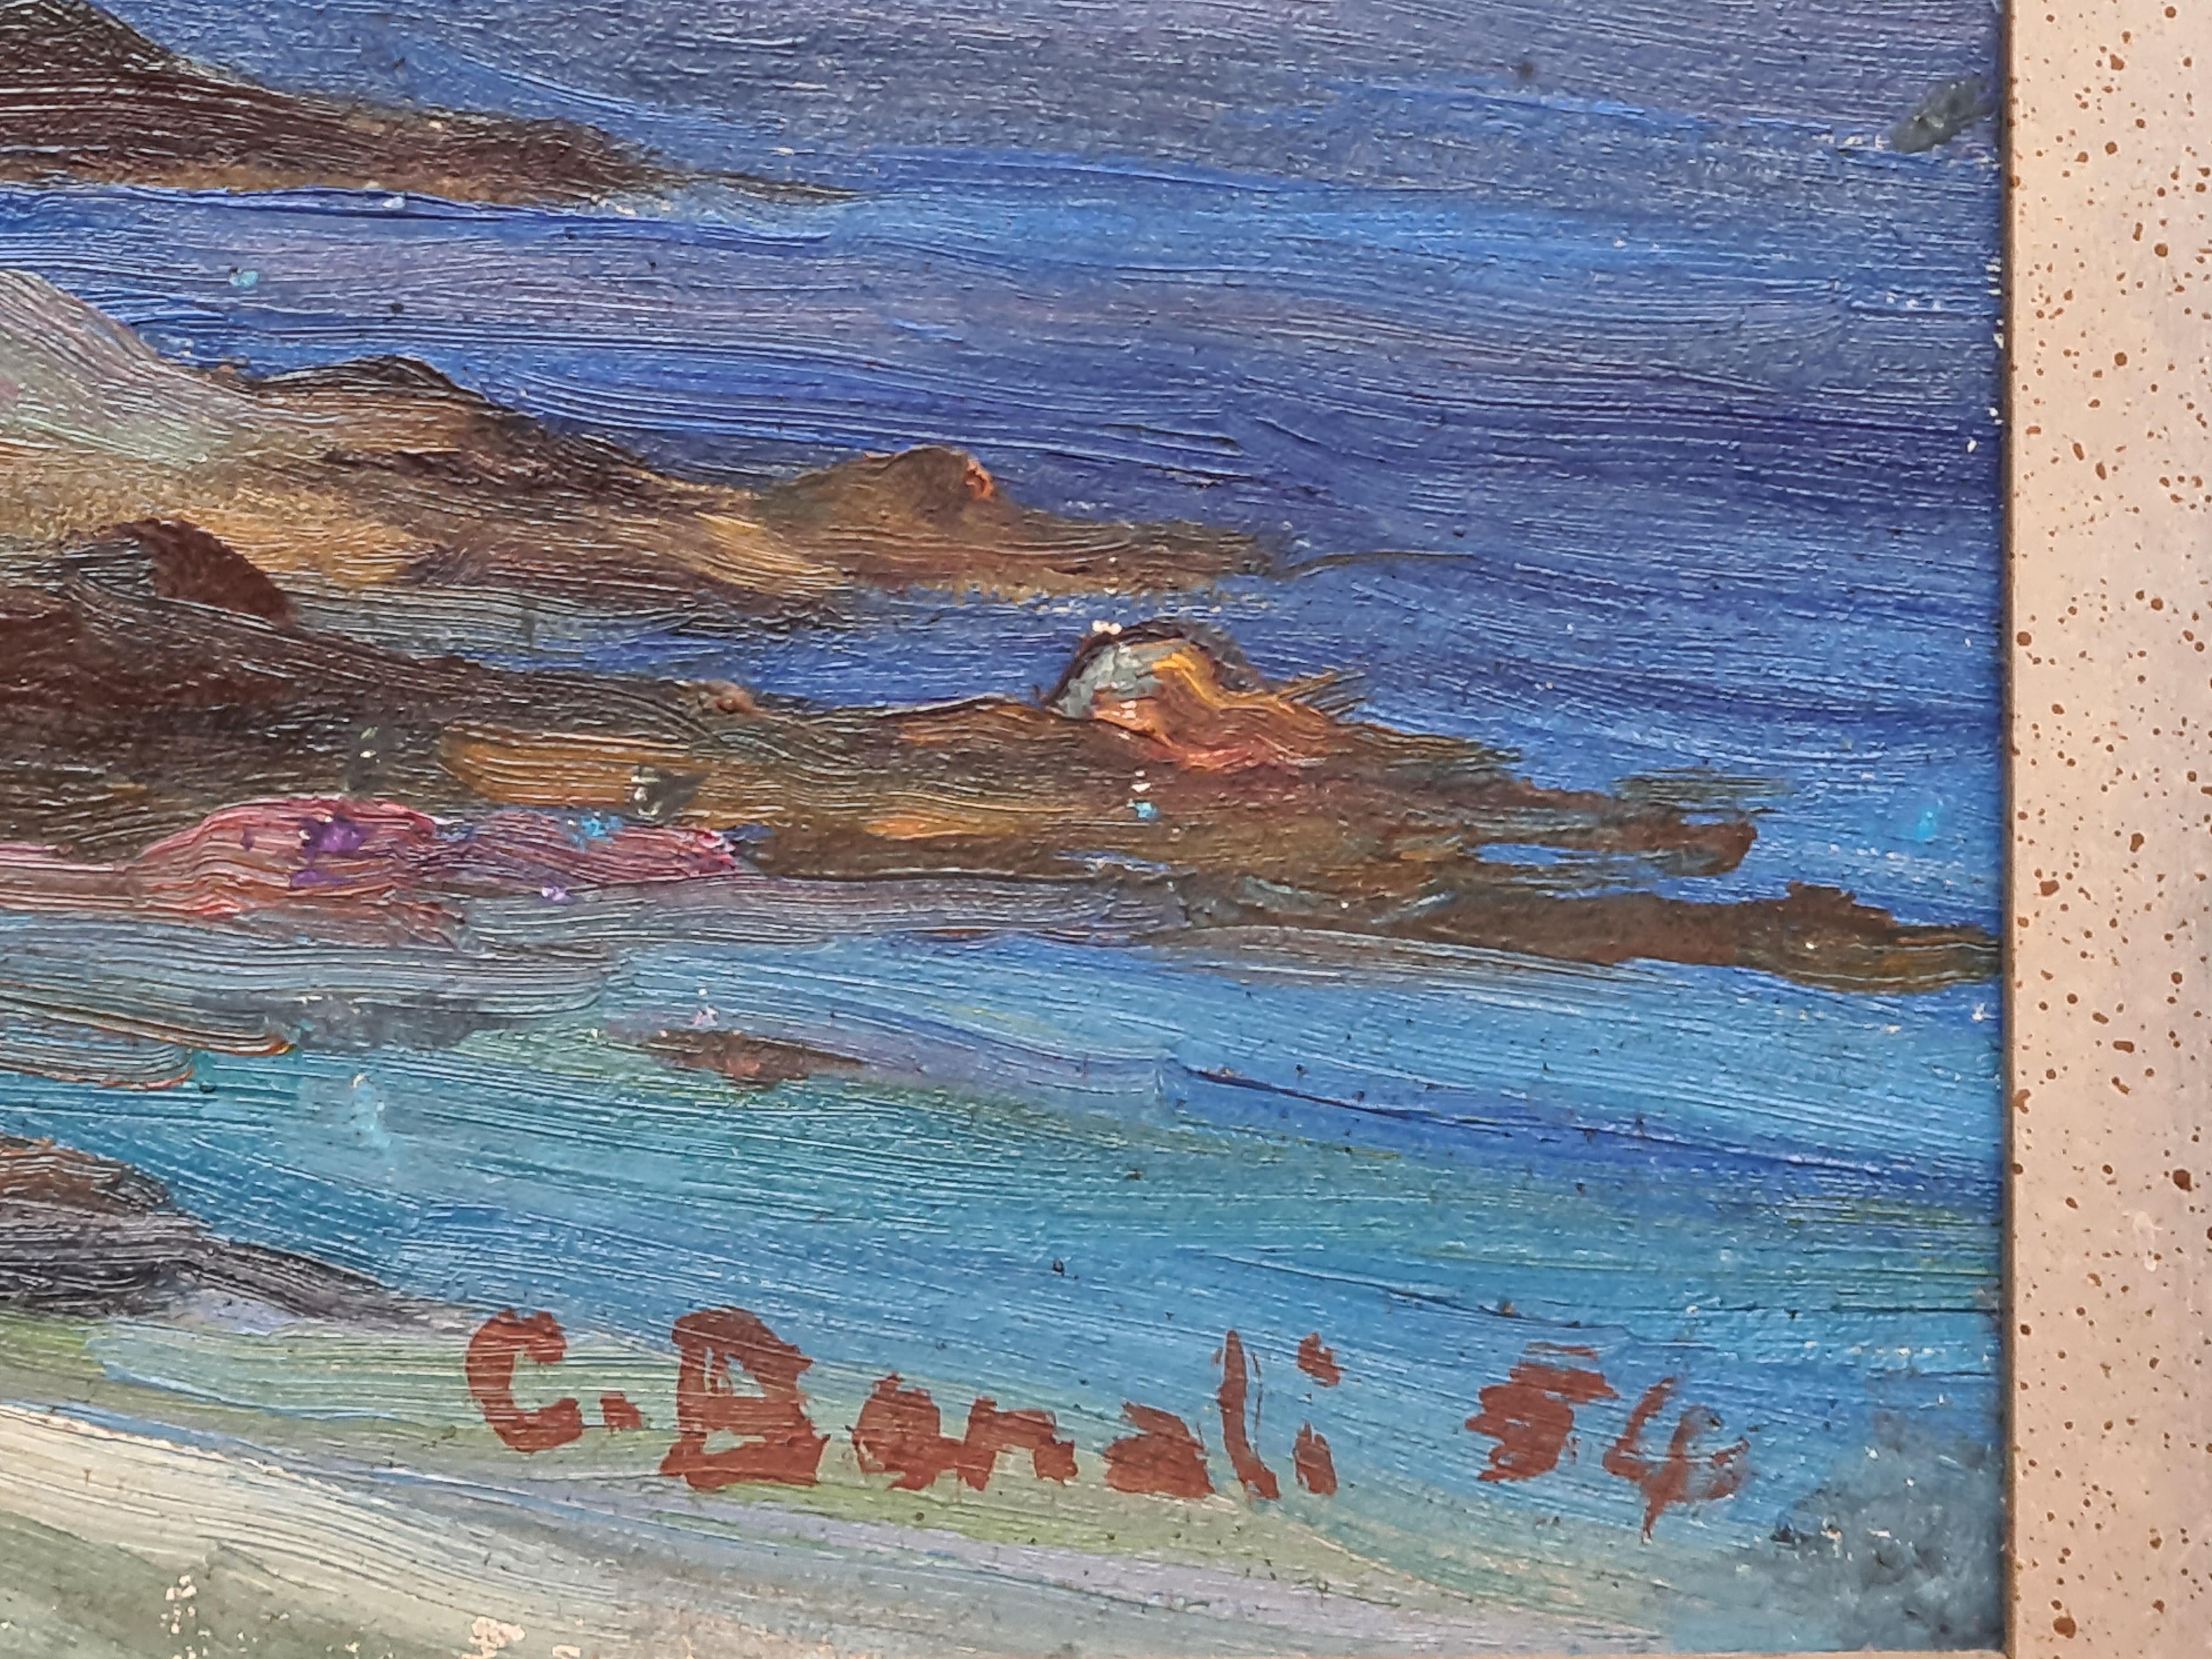 A colourful Impressionist seascape of Cap Corse by C Benali. The painting is signed bottom right and a location, Grischoni, Cap Corse, to the backboard. Presented in patinated silver coloured wood frame.

A charming view of the iconic coastline of